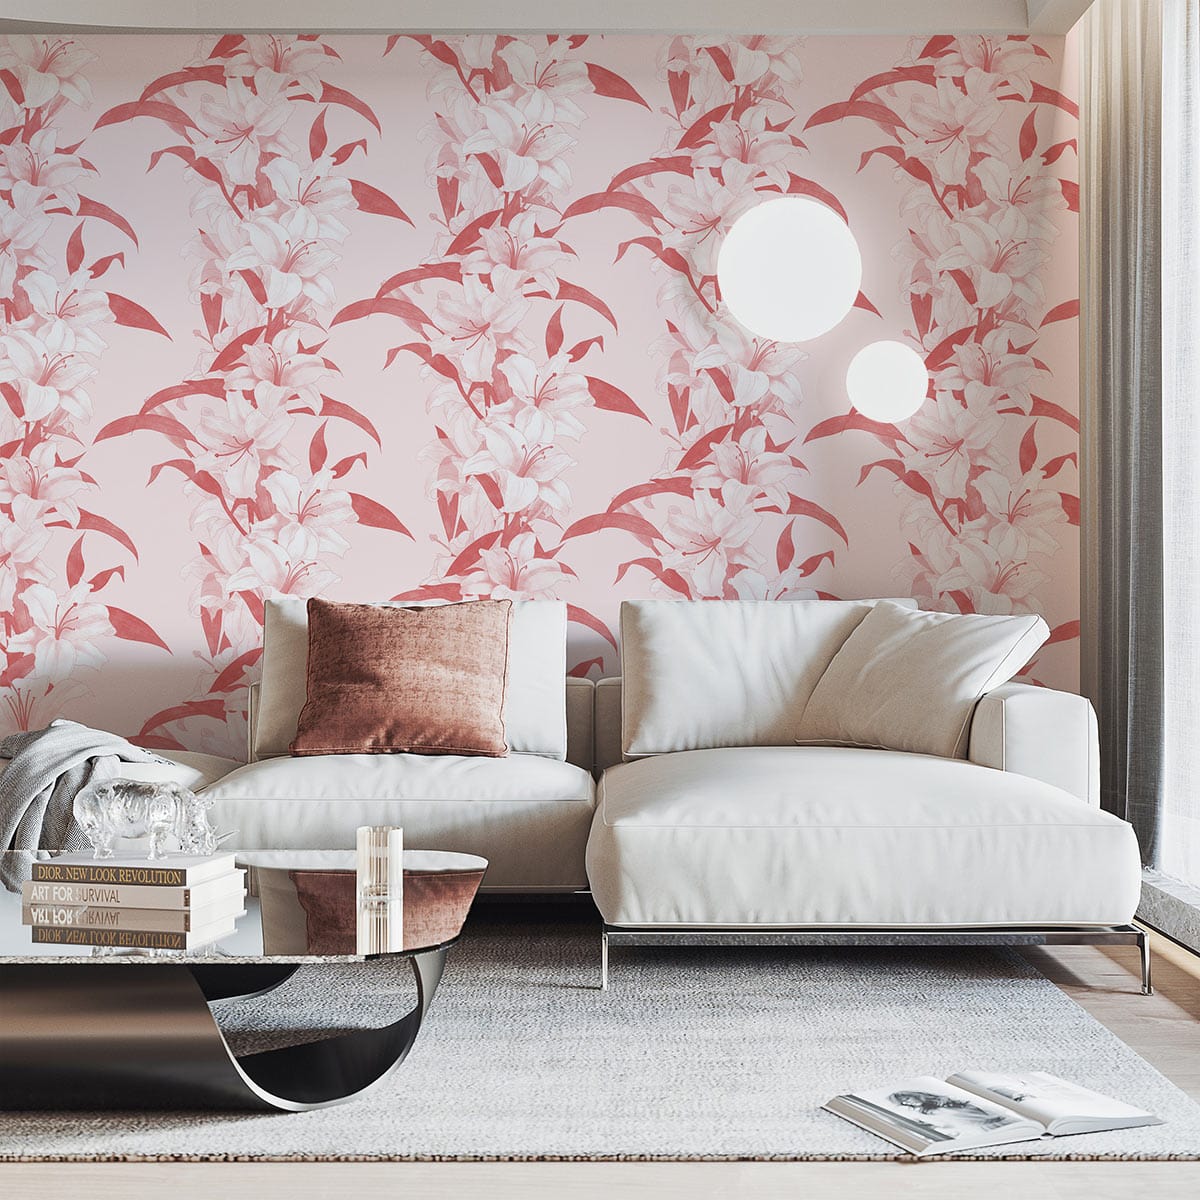 Pink lilies in bloom adorn the wall mural wallpaper in the living area.